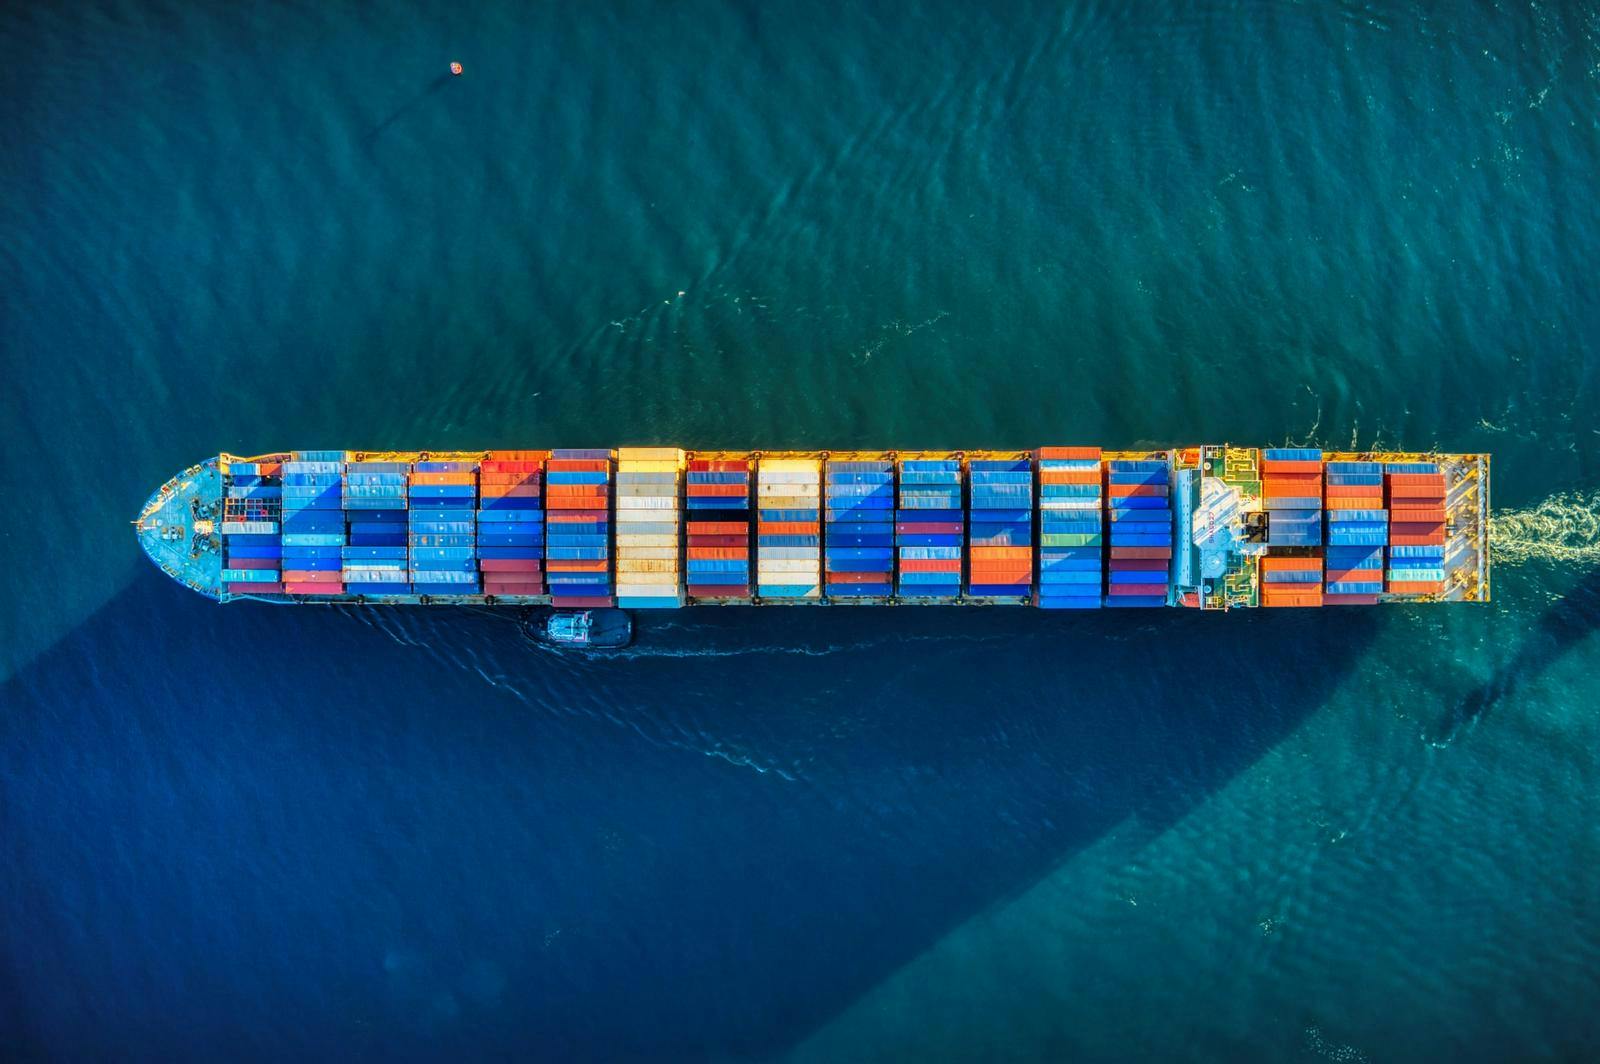 aerial image of a container ship